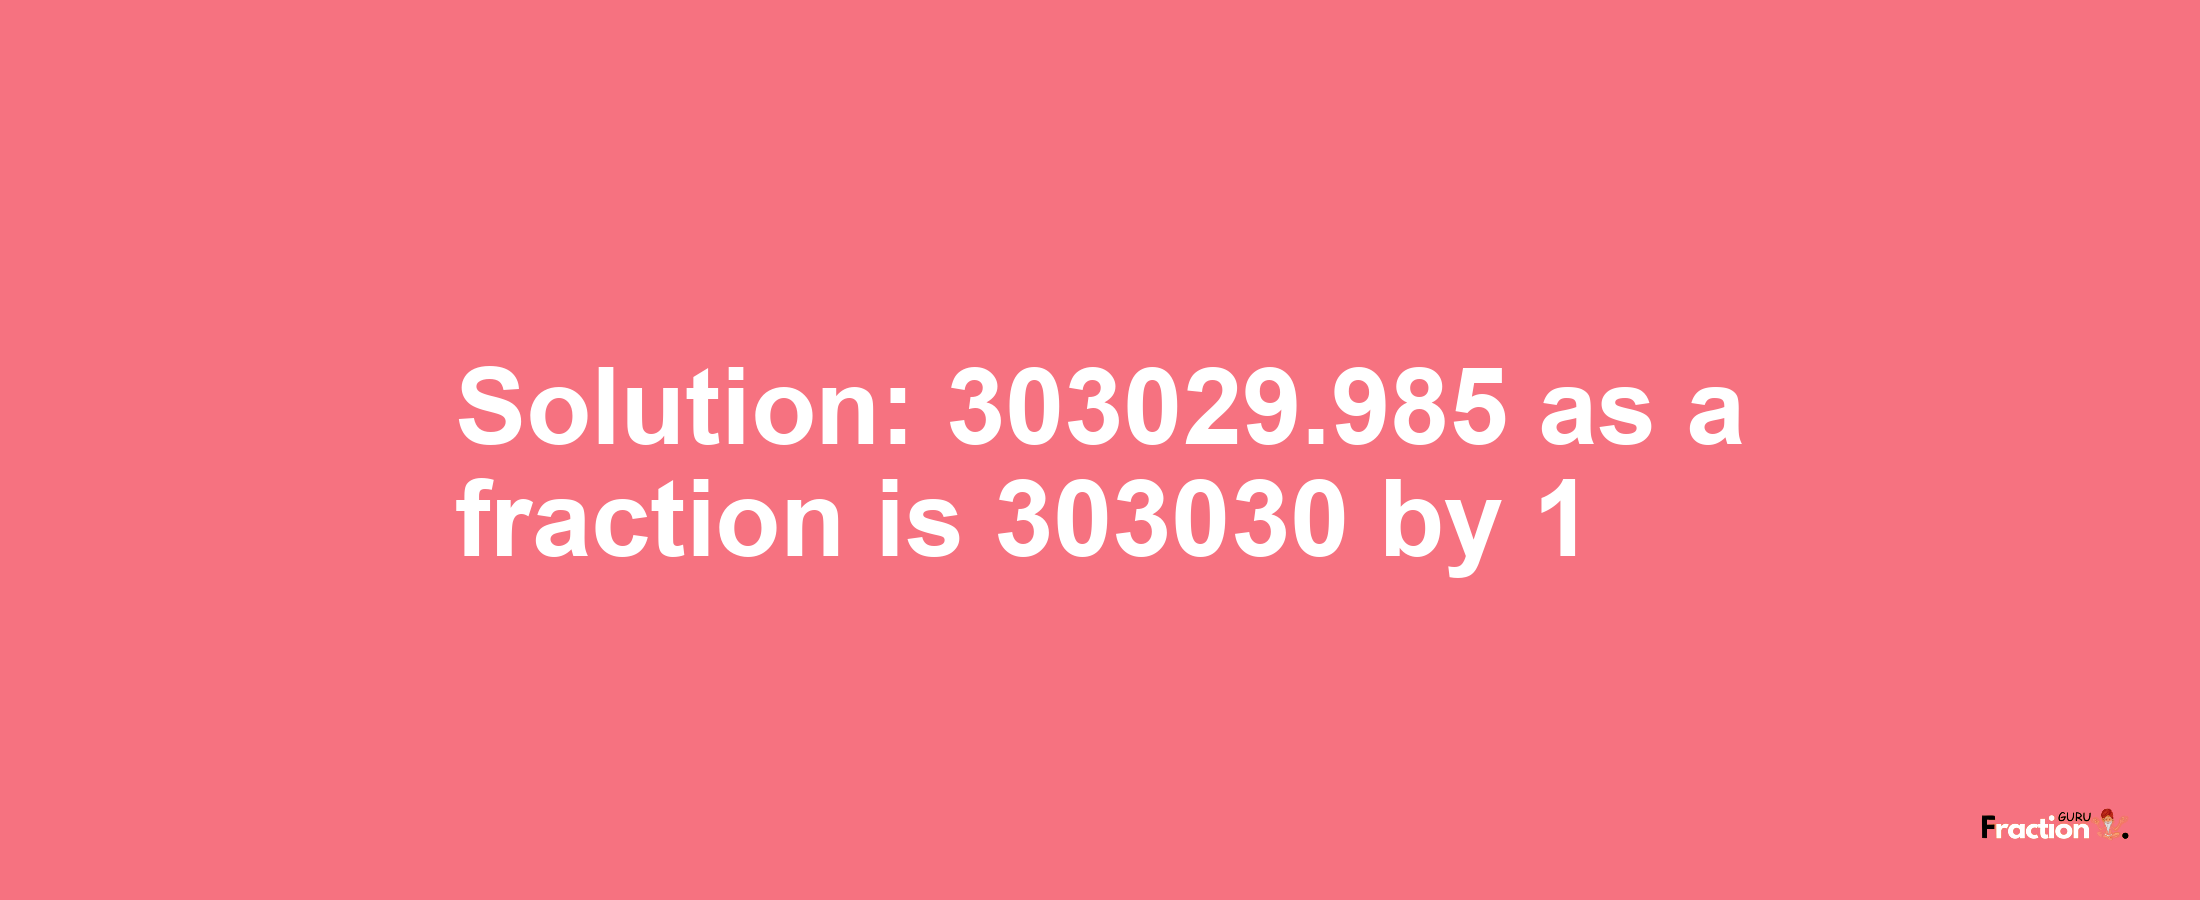 Solution:303029.985 as a fraction is 303030/1